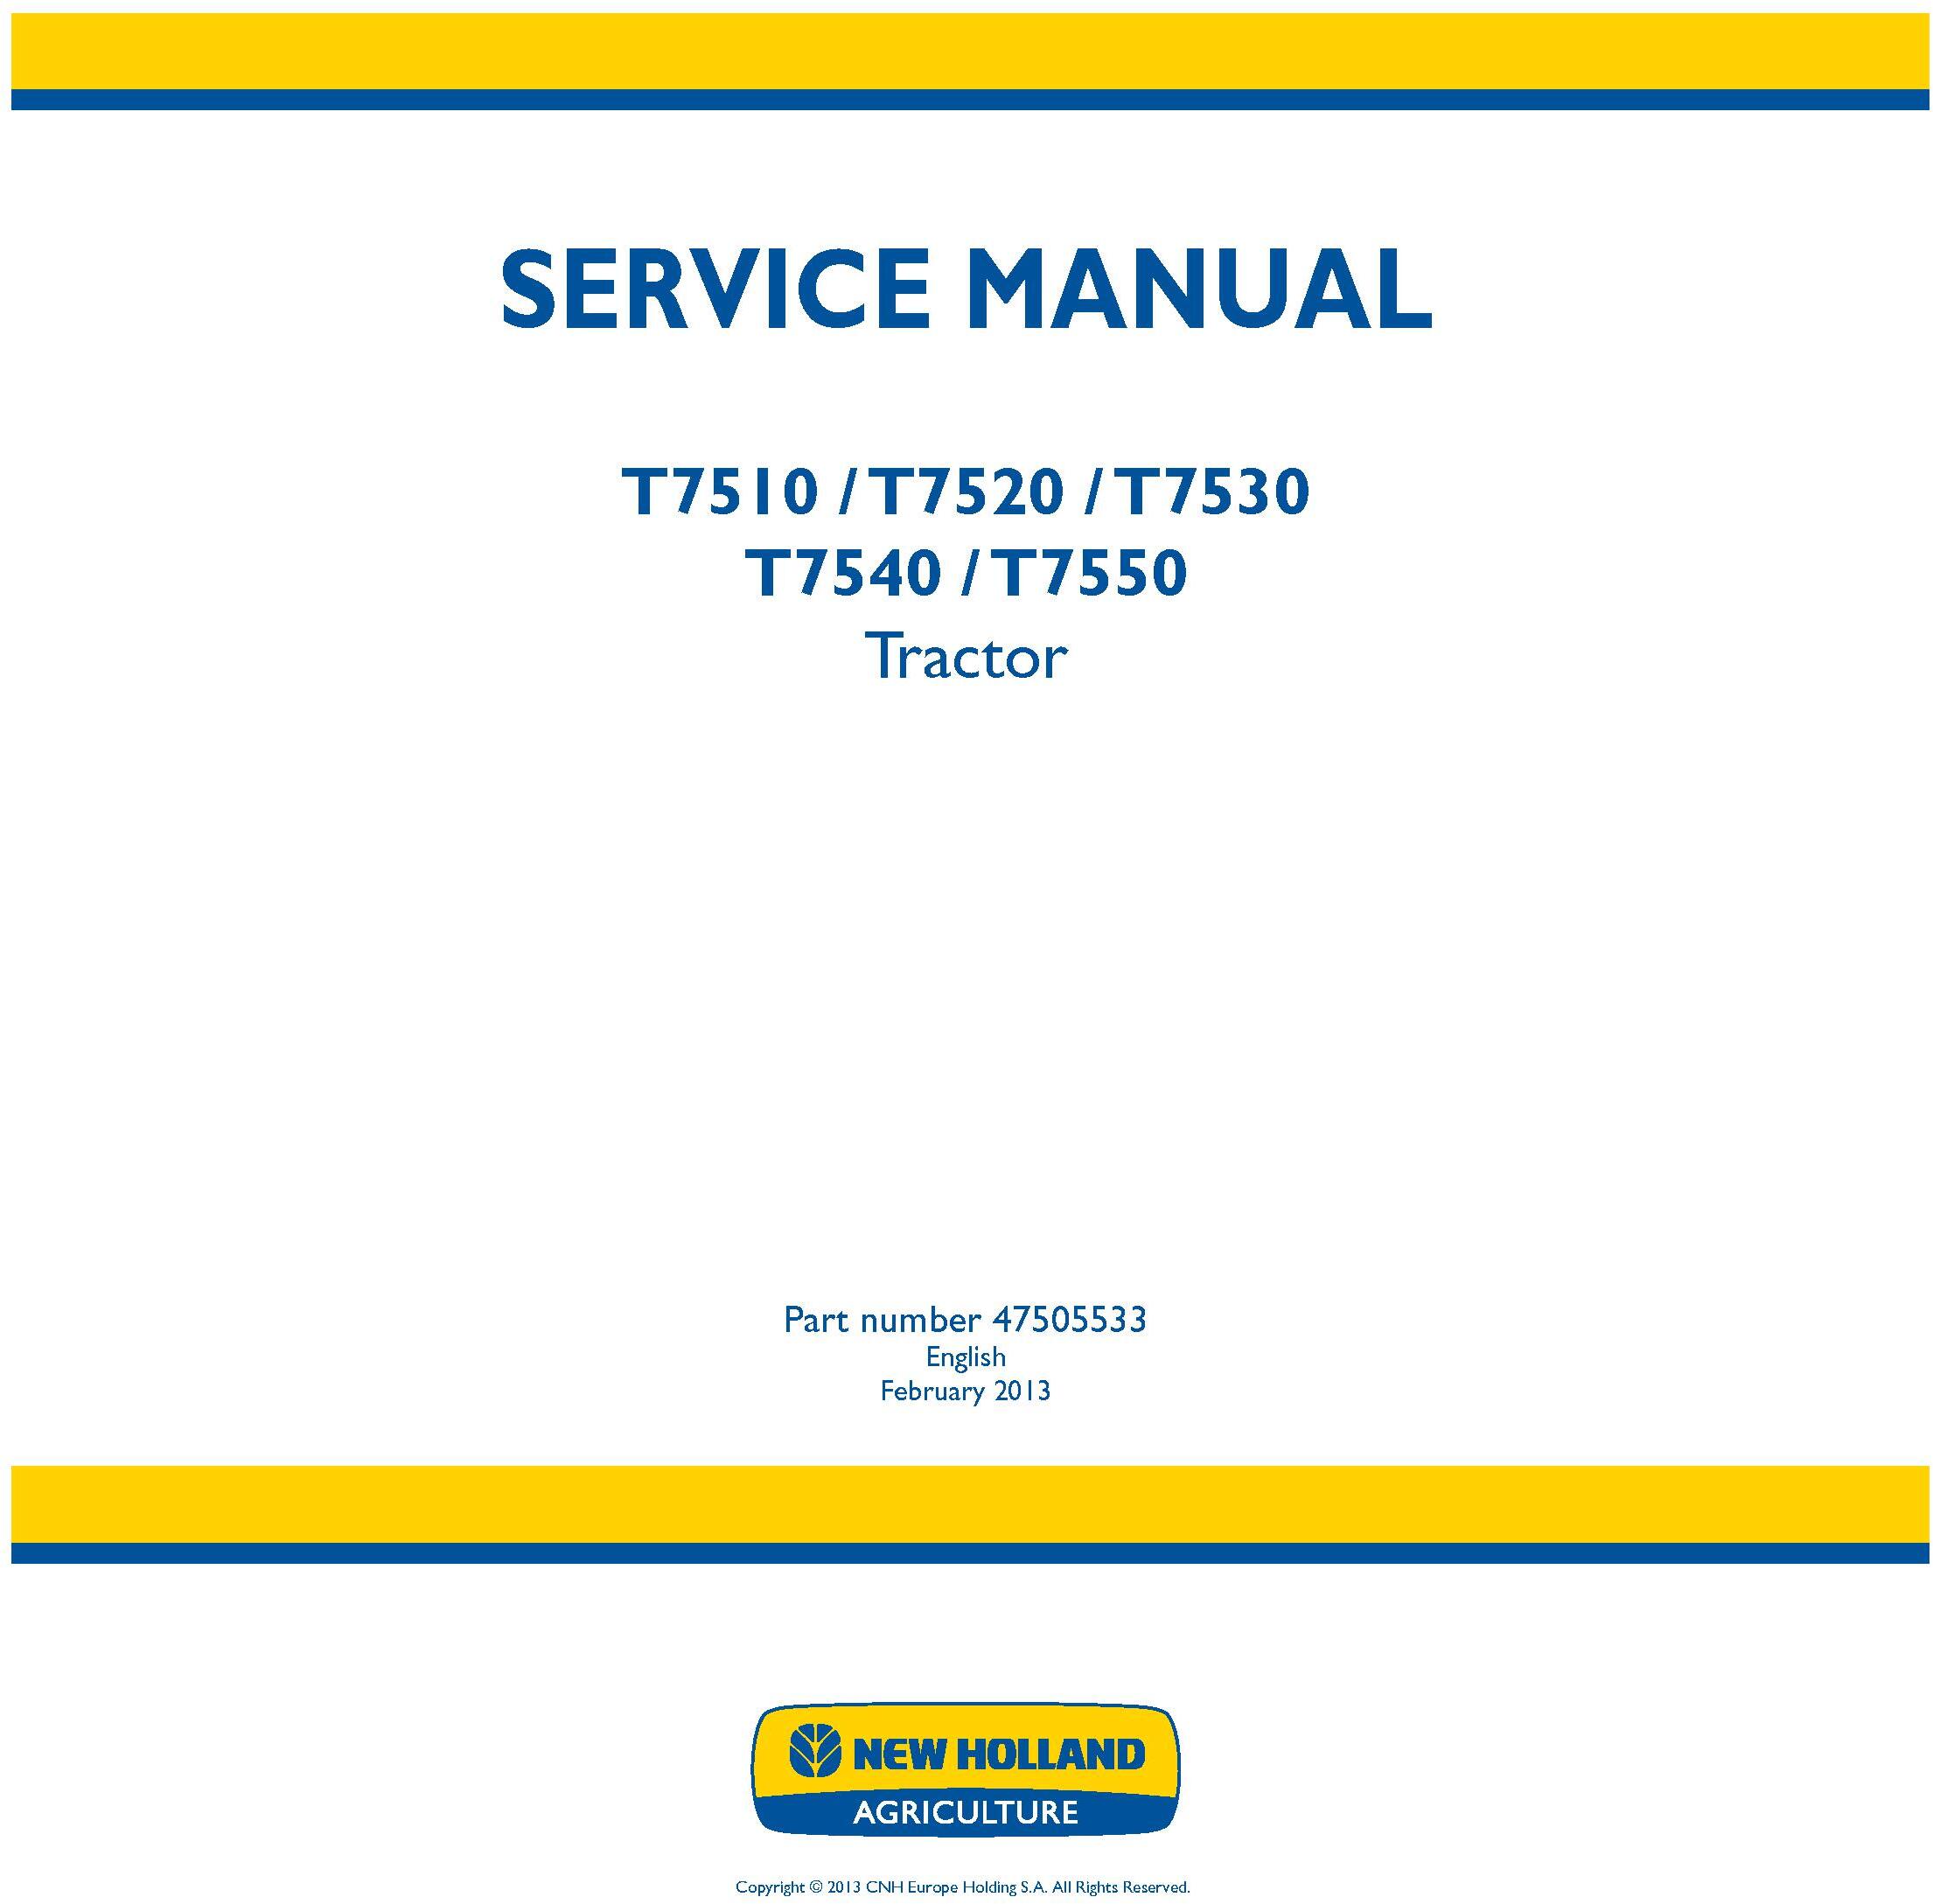 New Holland T7510, T7520, T7530, T7540, T7550 Tractor Service Manual - 19384